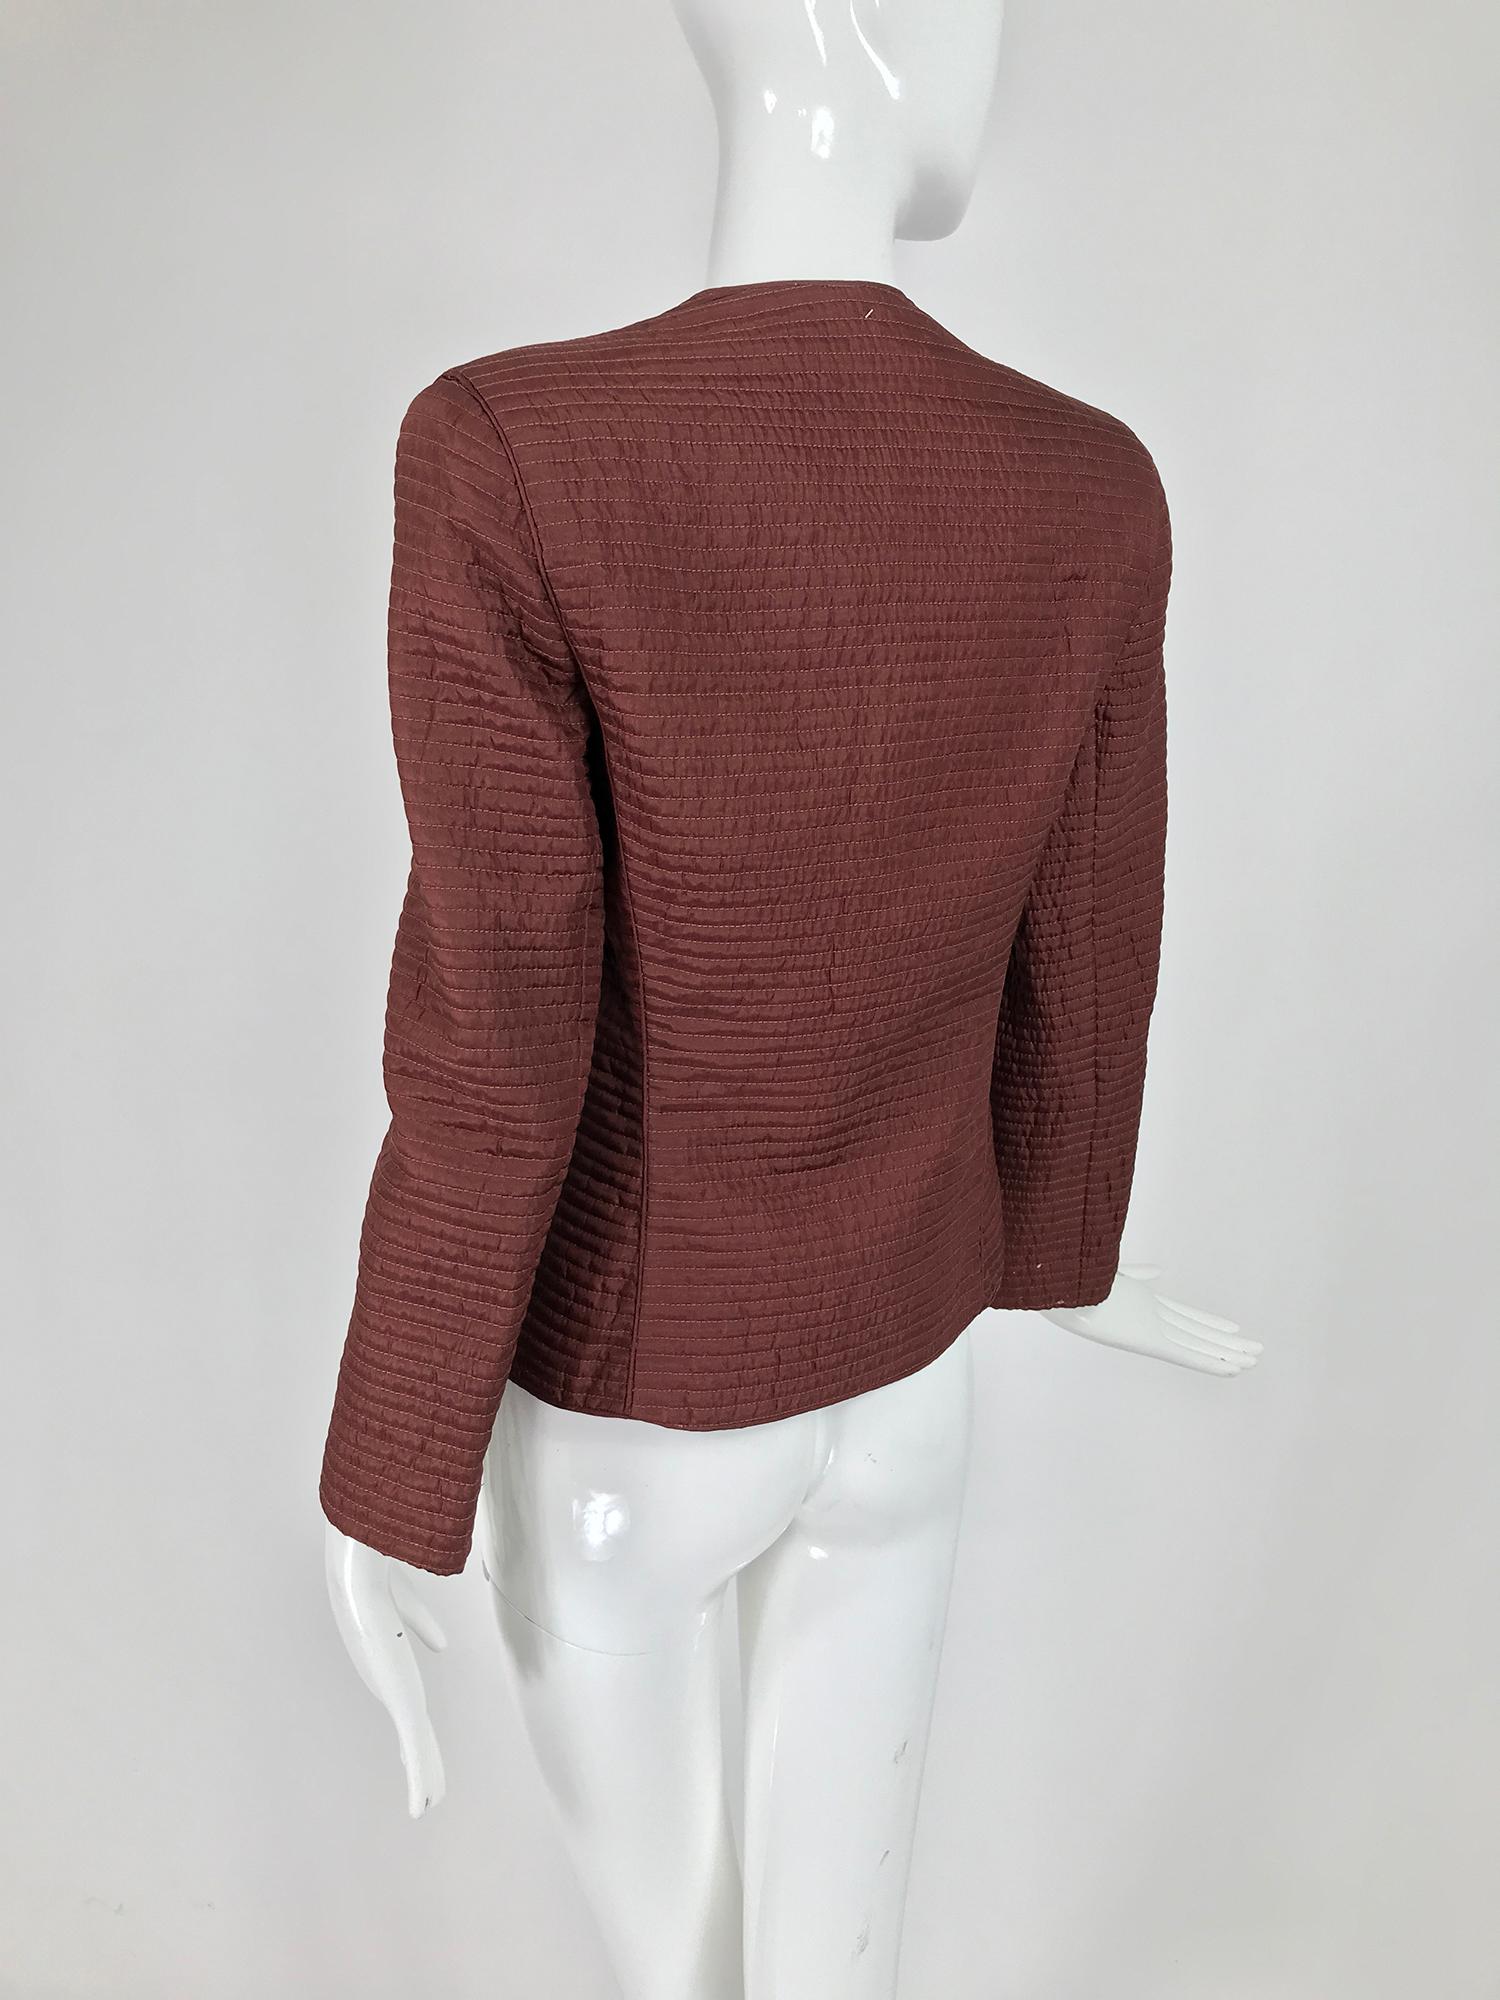 Mary McFadden Quilted Jacket in Rich Raisin Brown 1970s 4